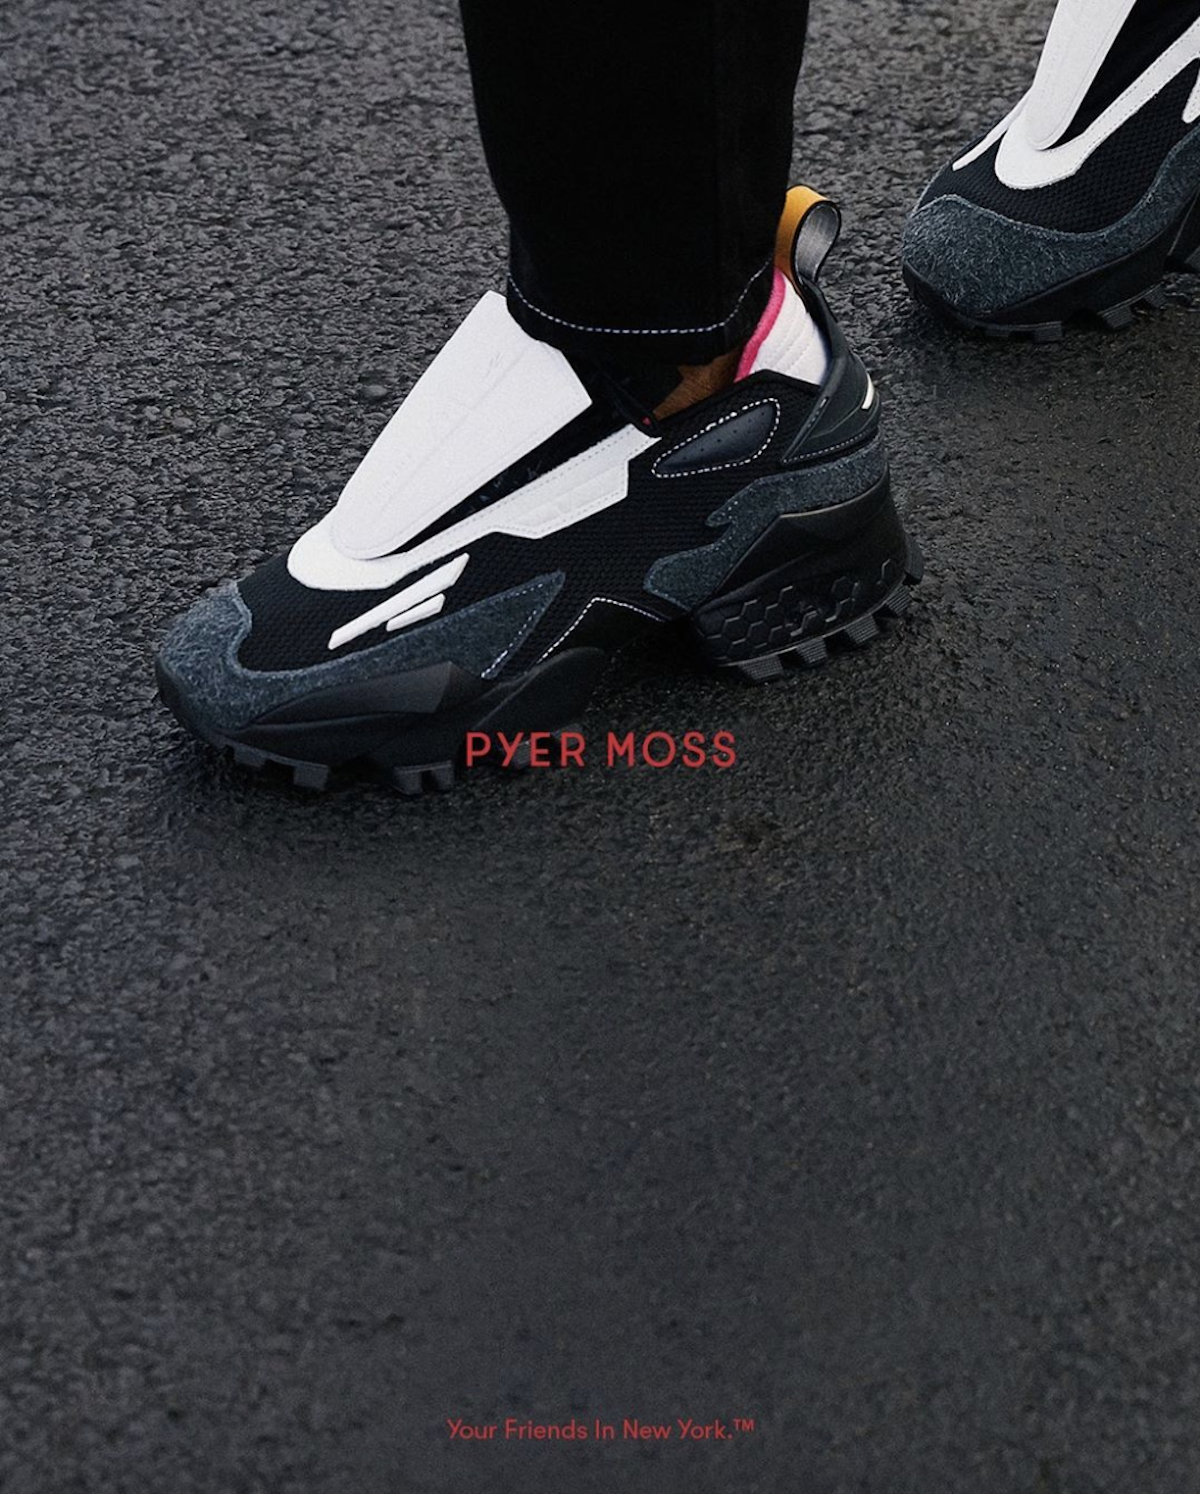 Pyer Moss and Reebok Support the Innocence Project with Latest Experiment 4 Fury